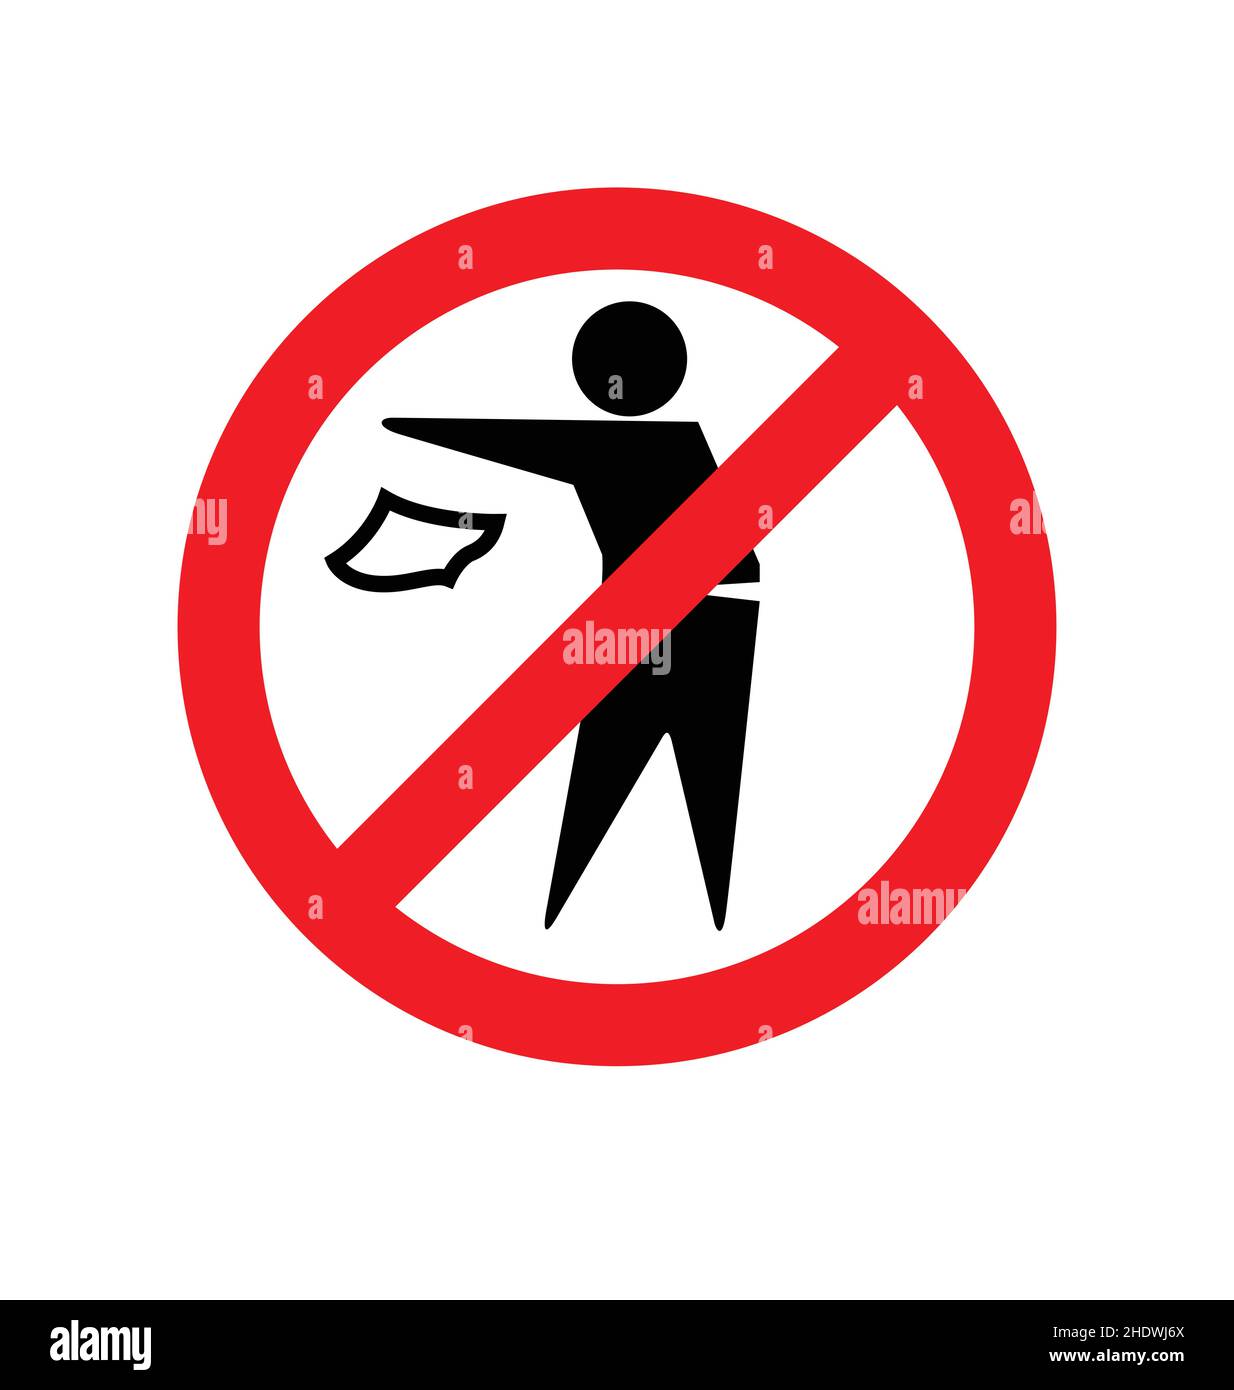 do not litter no littering logo sign symbol rubbish trash vector isolated on white background Stock Vector